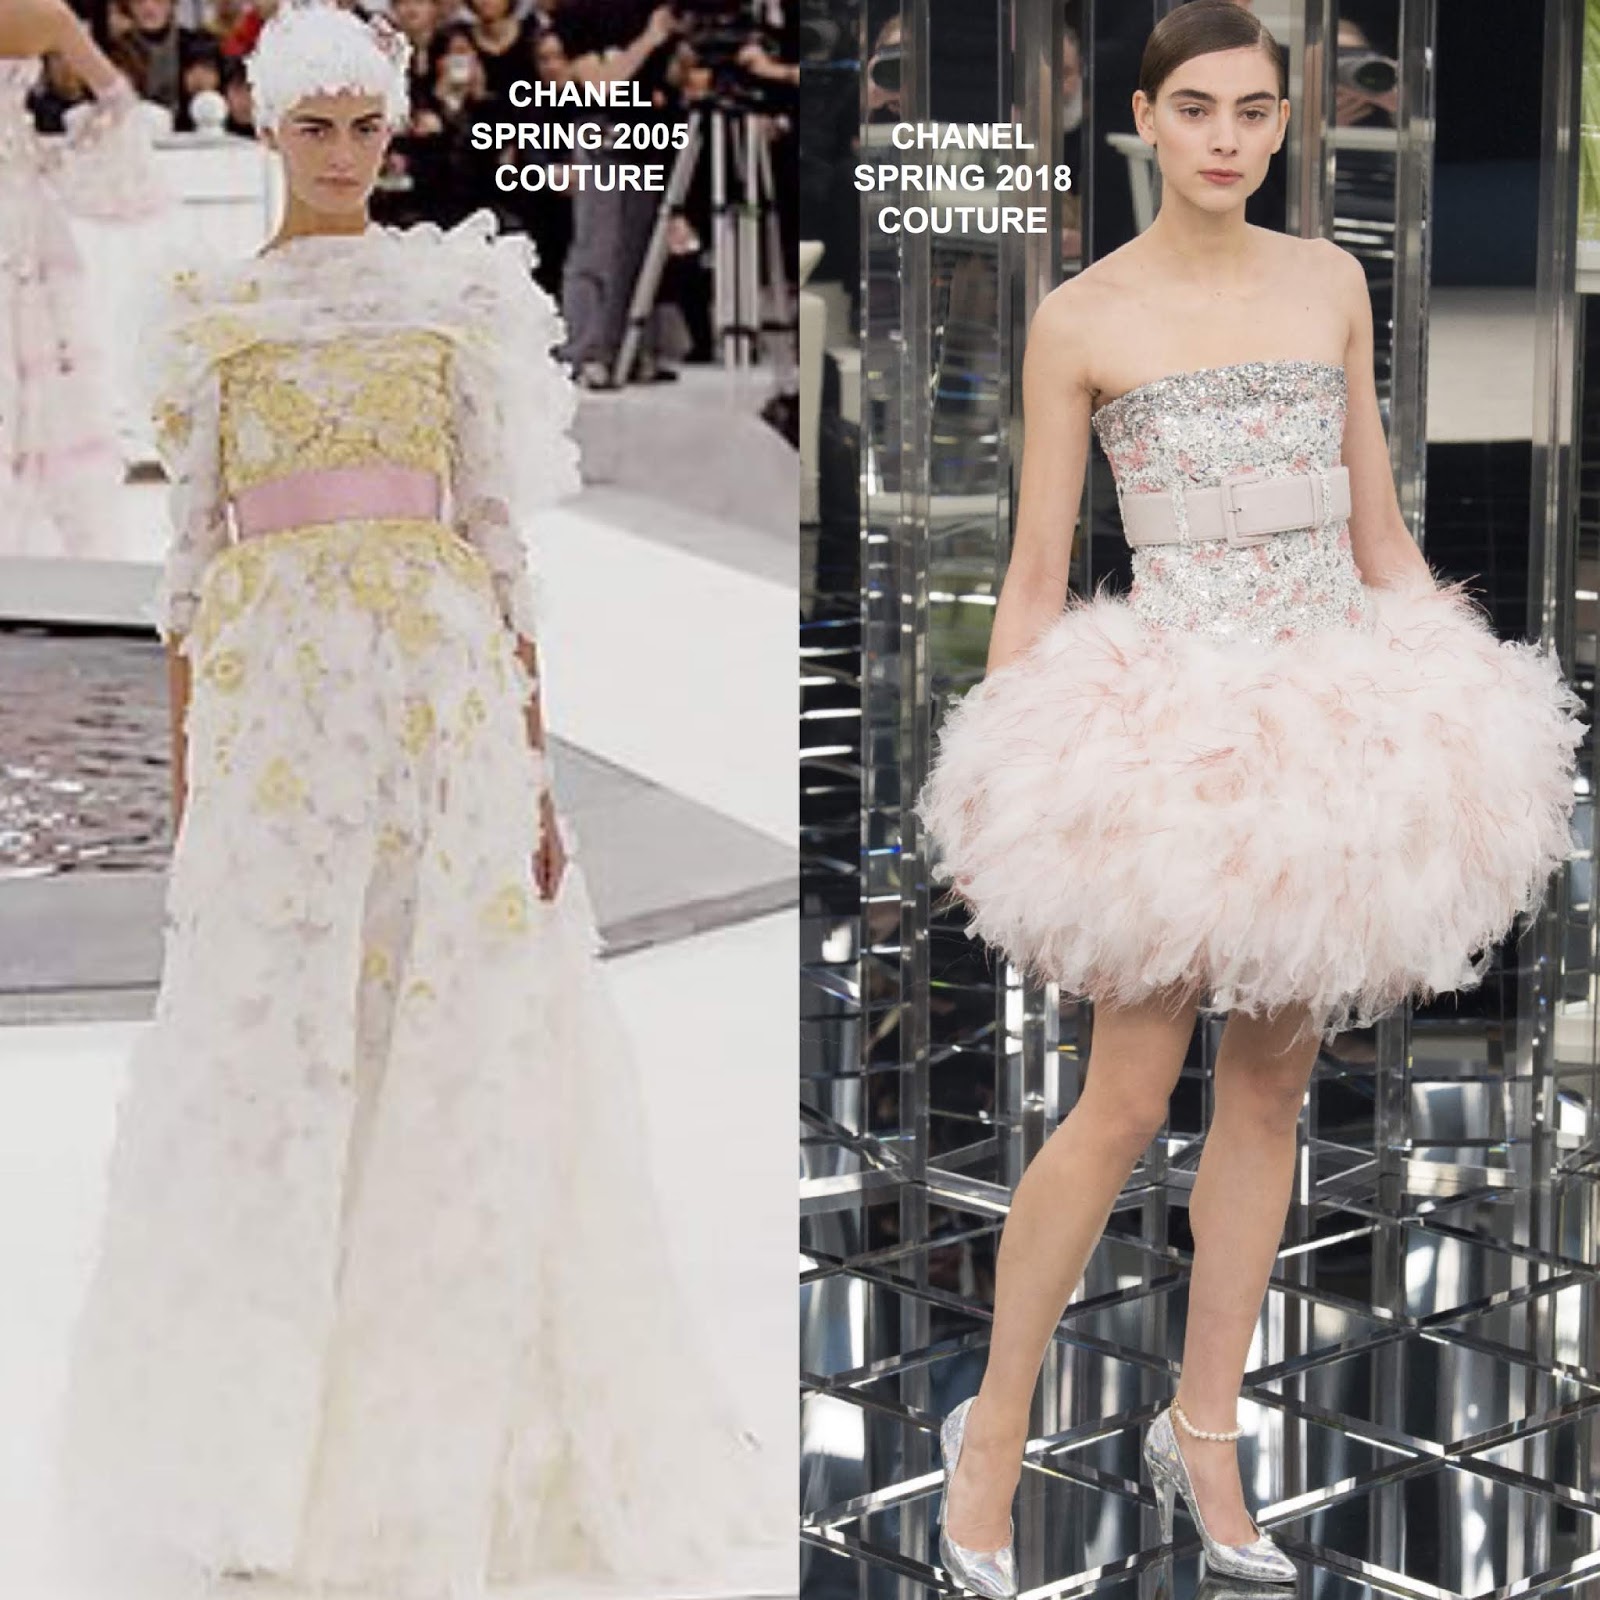 Keira Knightley & Ellie Bamber in Chanel Couture at 'The